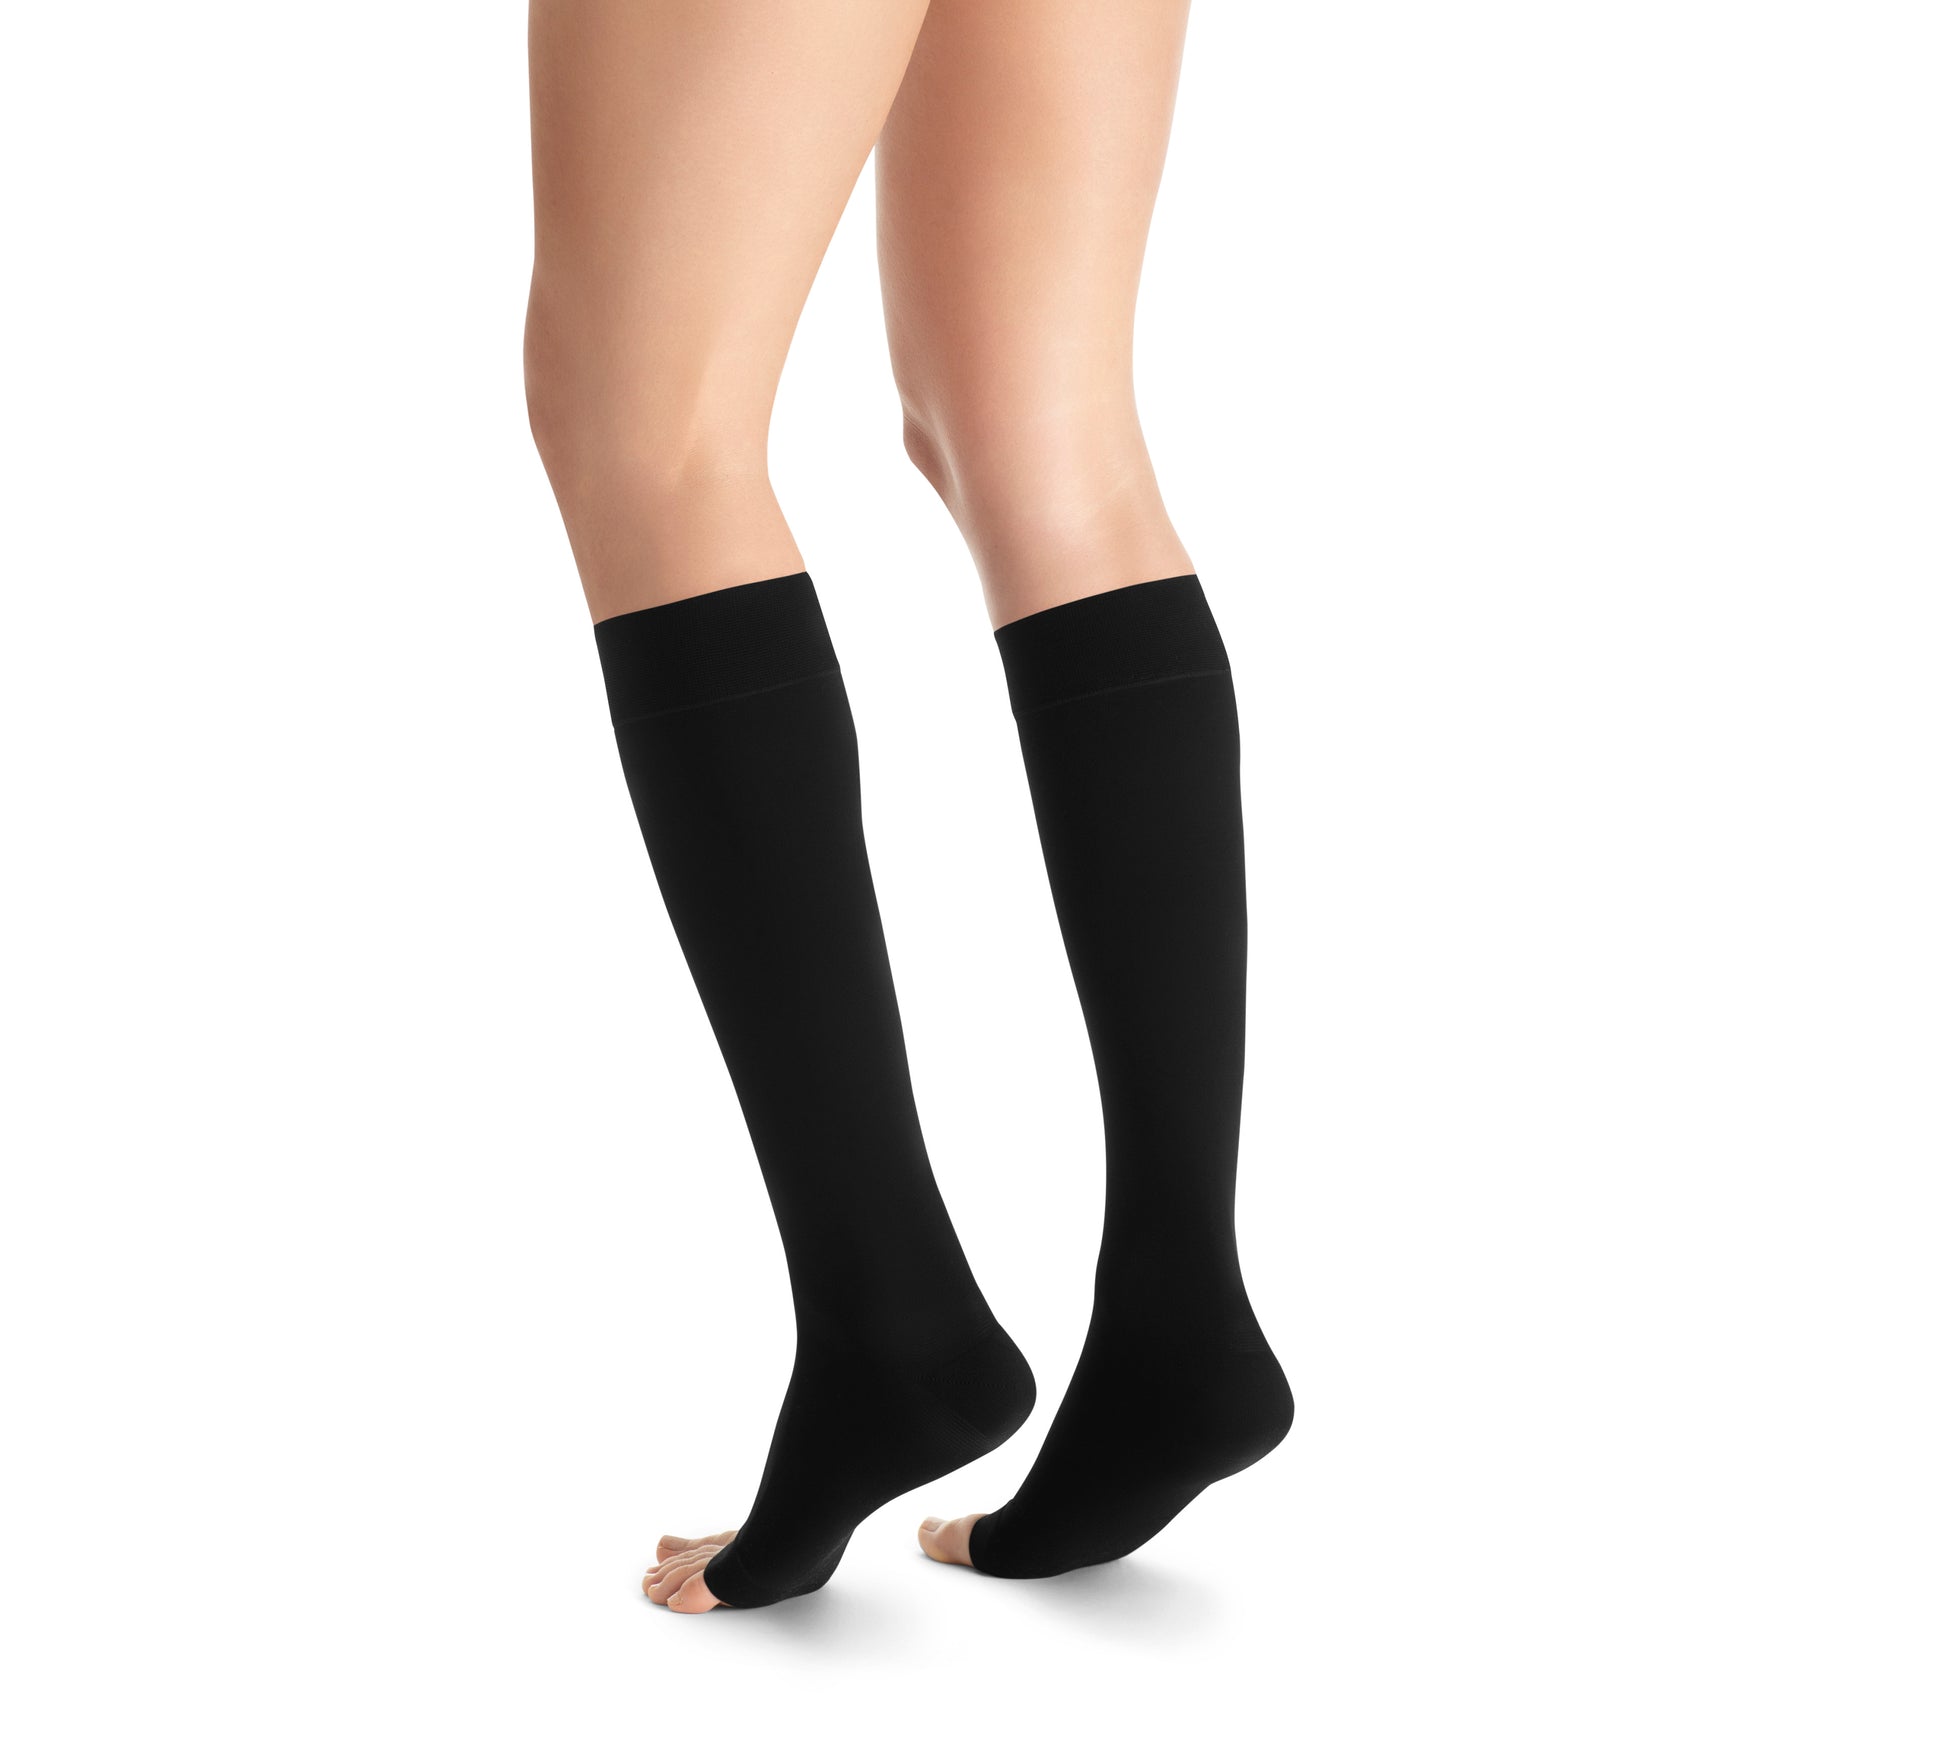 JOBST Opaque Compression Stockings 20-30 mmHg Knee High SoftFit Band Open Toe, Full Calf back view color black